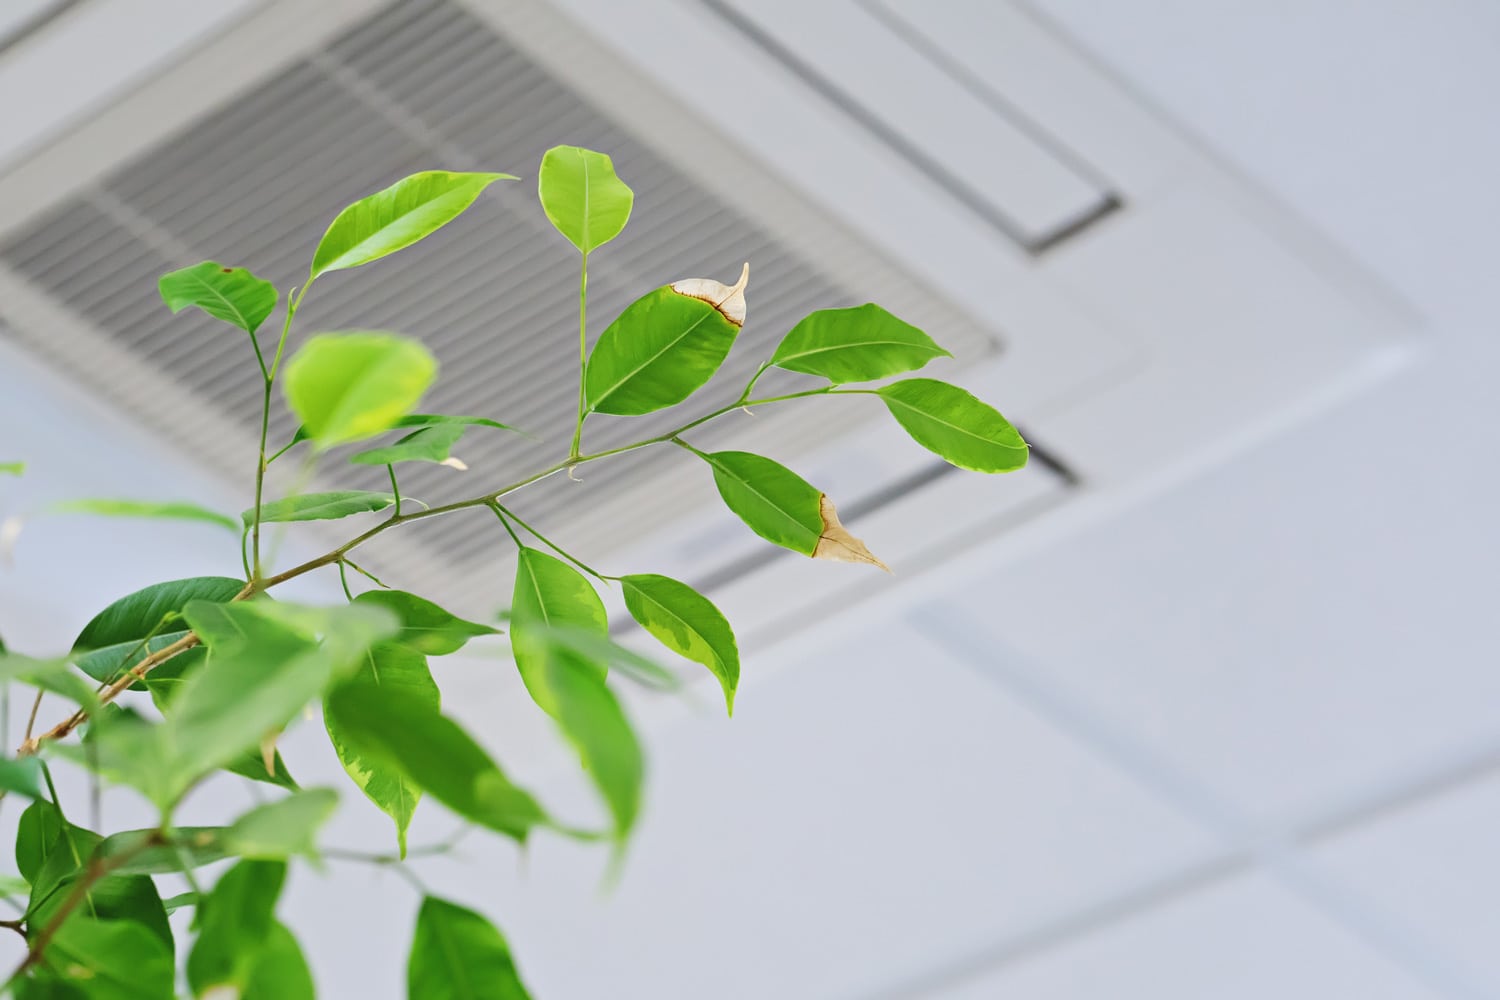 Ficus green leaves on the background ofceiling air conditioner in modenr office or at home. Indoor air quality concept